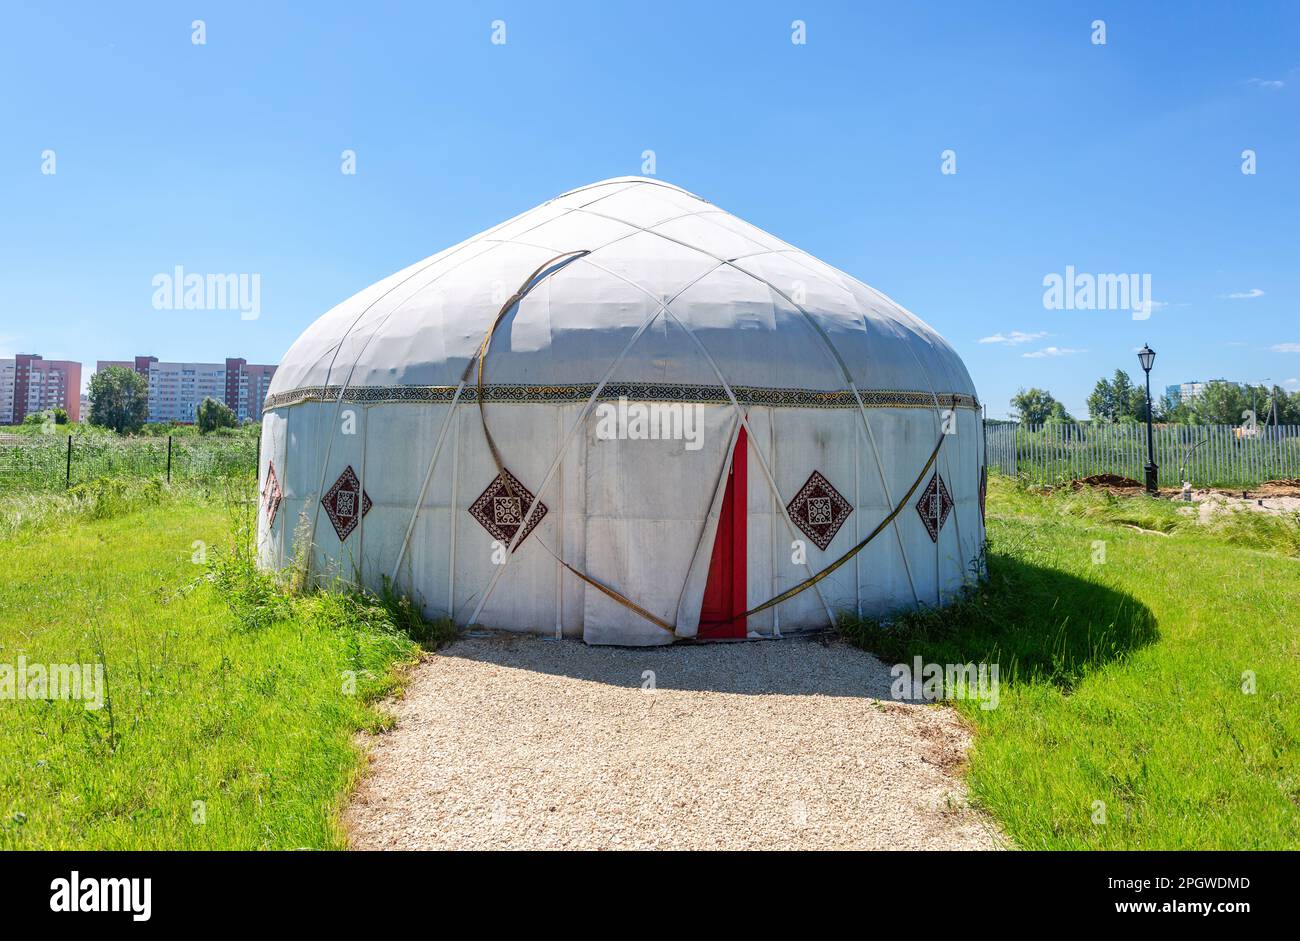 Samara, Russia - September 25, 2021: Yurt - national ancient house of the nomad peoples of Asian countries. Traditional Kazakh yurt in summer. Dwellin Stock Photo